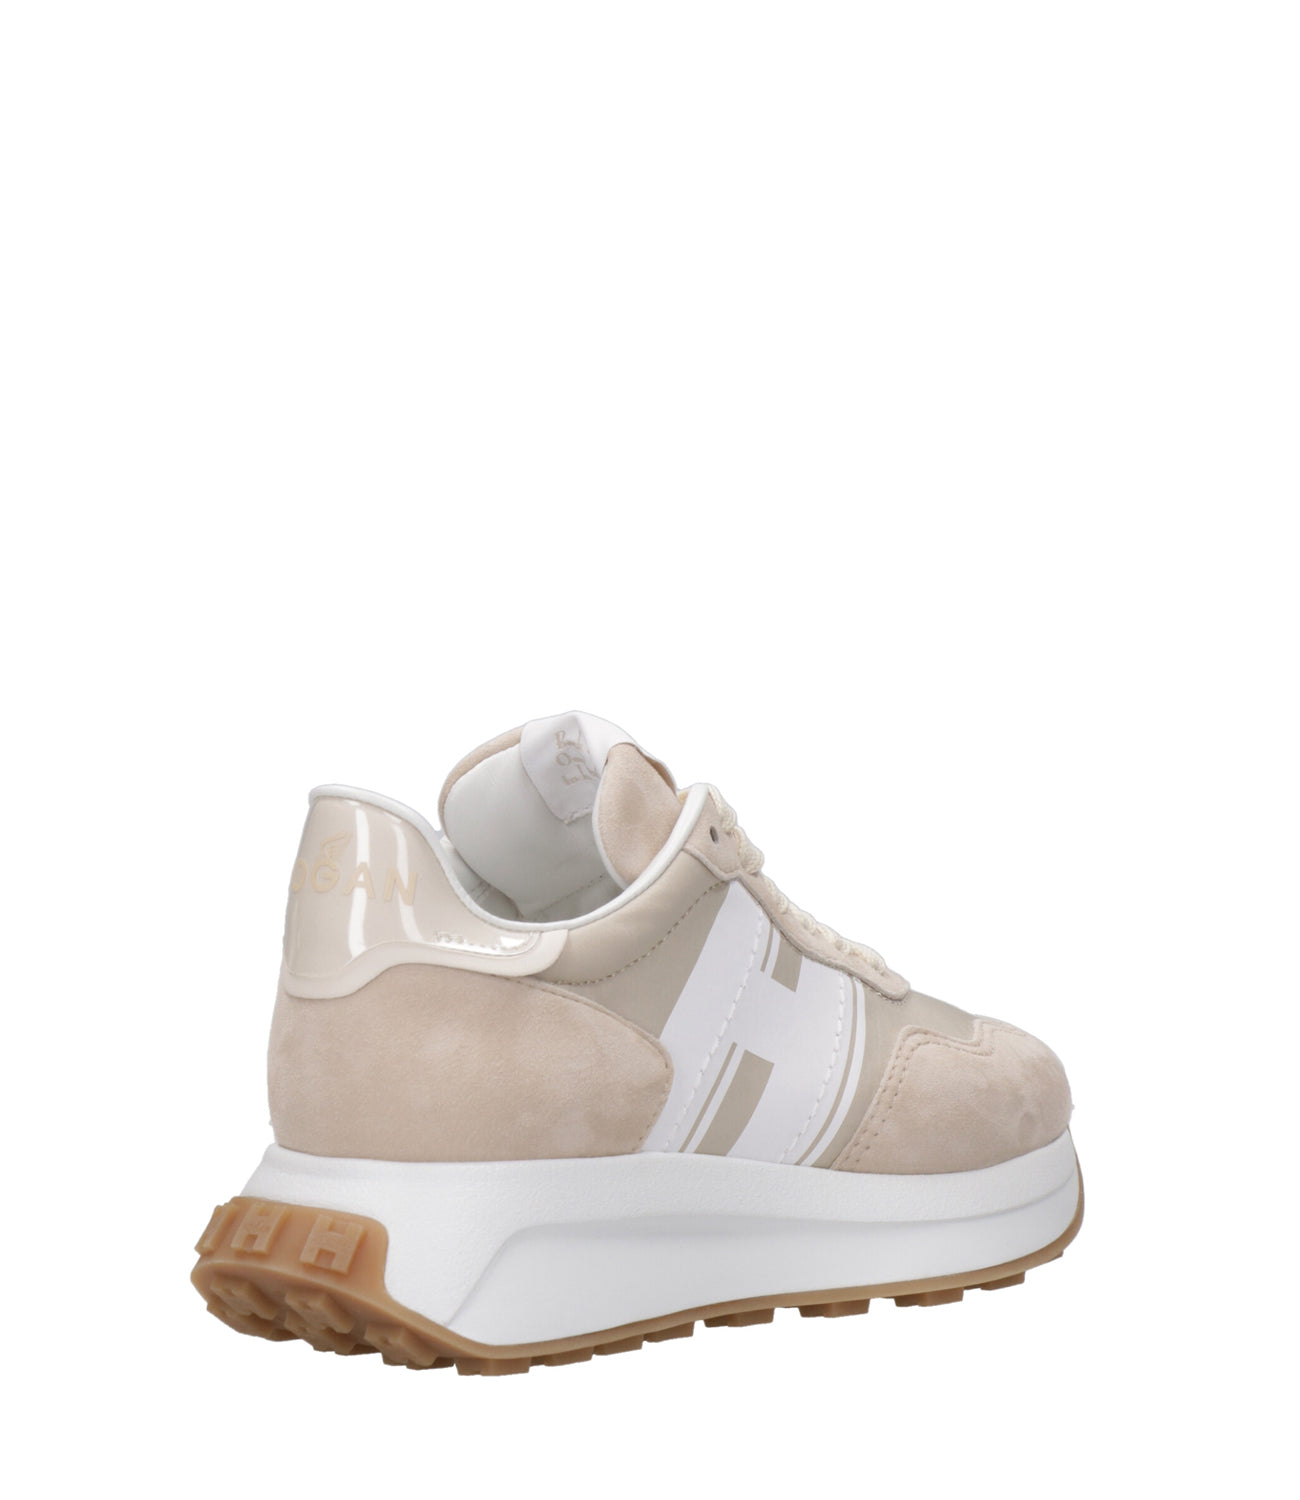 Hogan | H641 White and Beige Sneakers